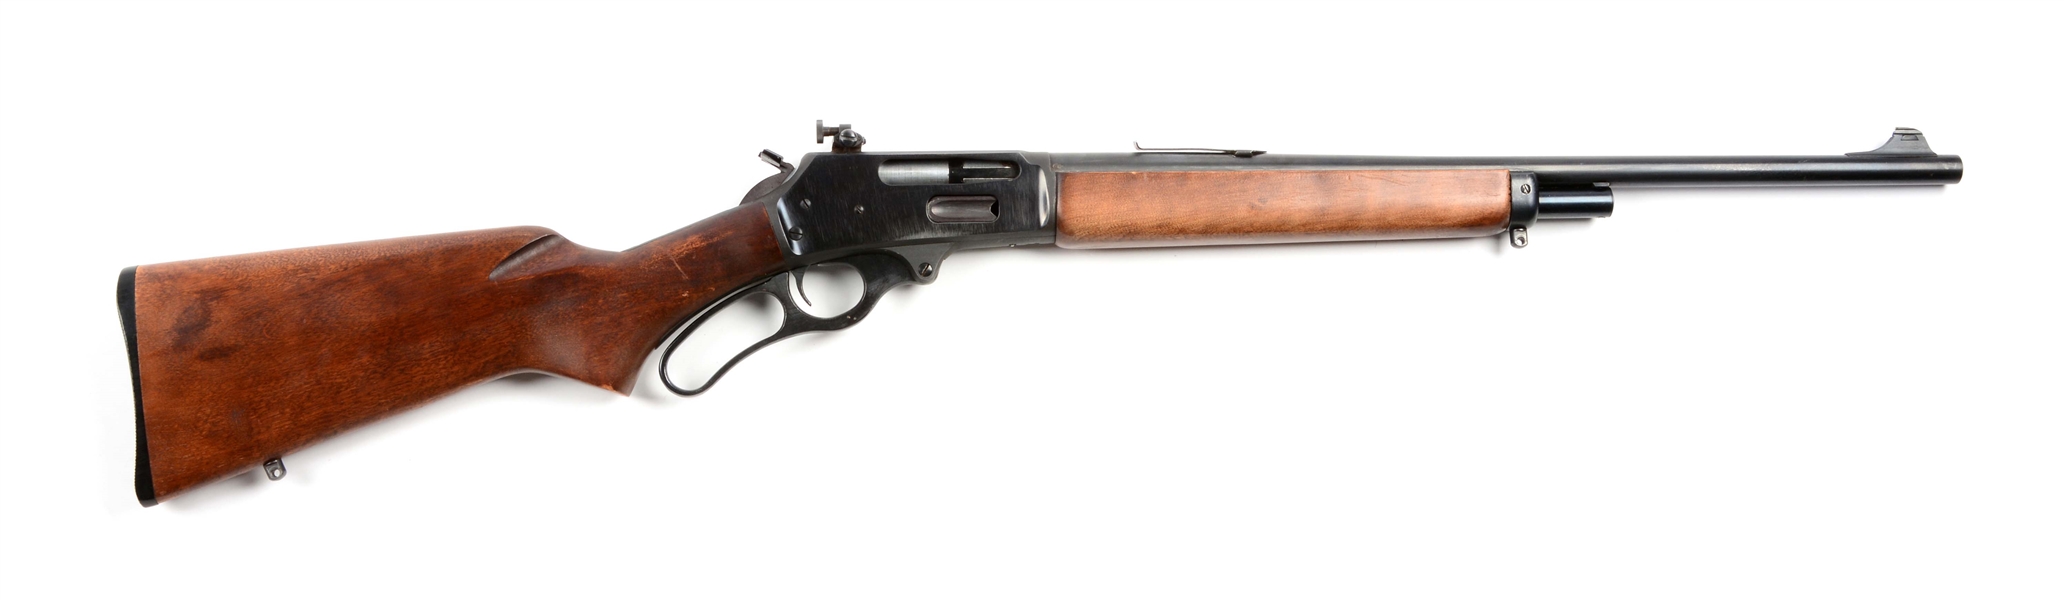 (M) MARLIN MODEL 30 "GLENFIELD" LEVER ACTION RIFLE.